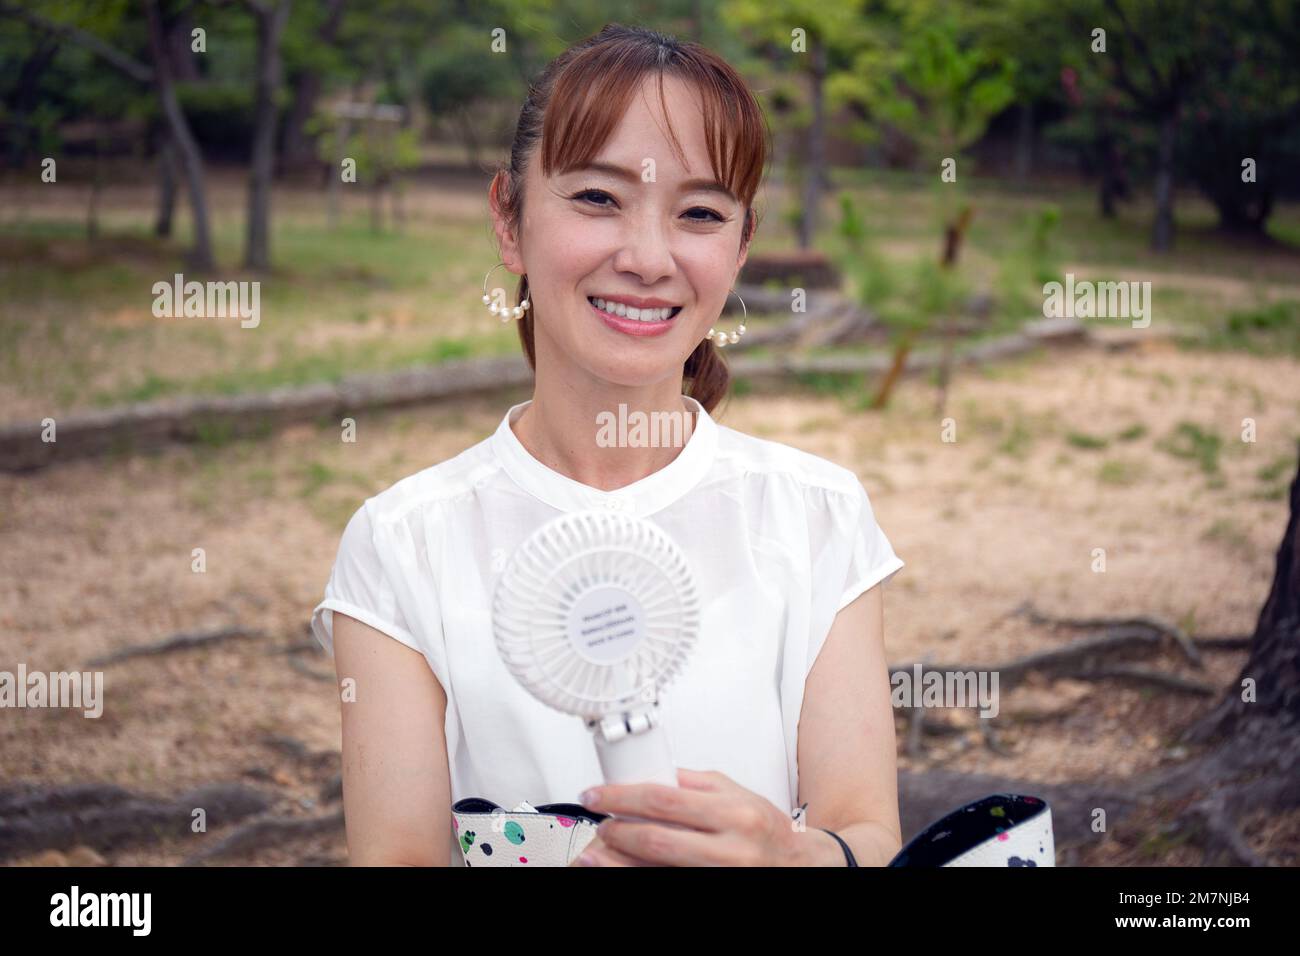 A mature Japanese woman outdoors in a park on a hot day holding a small electric fan. Stock Photo